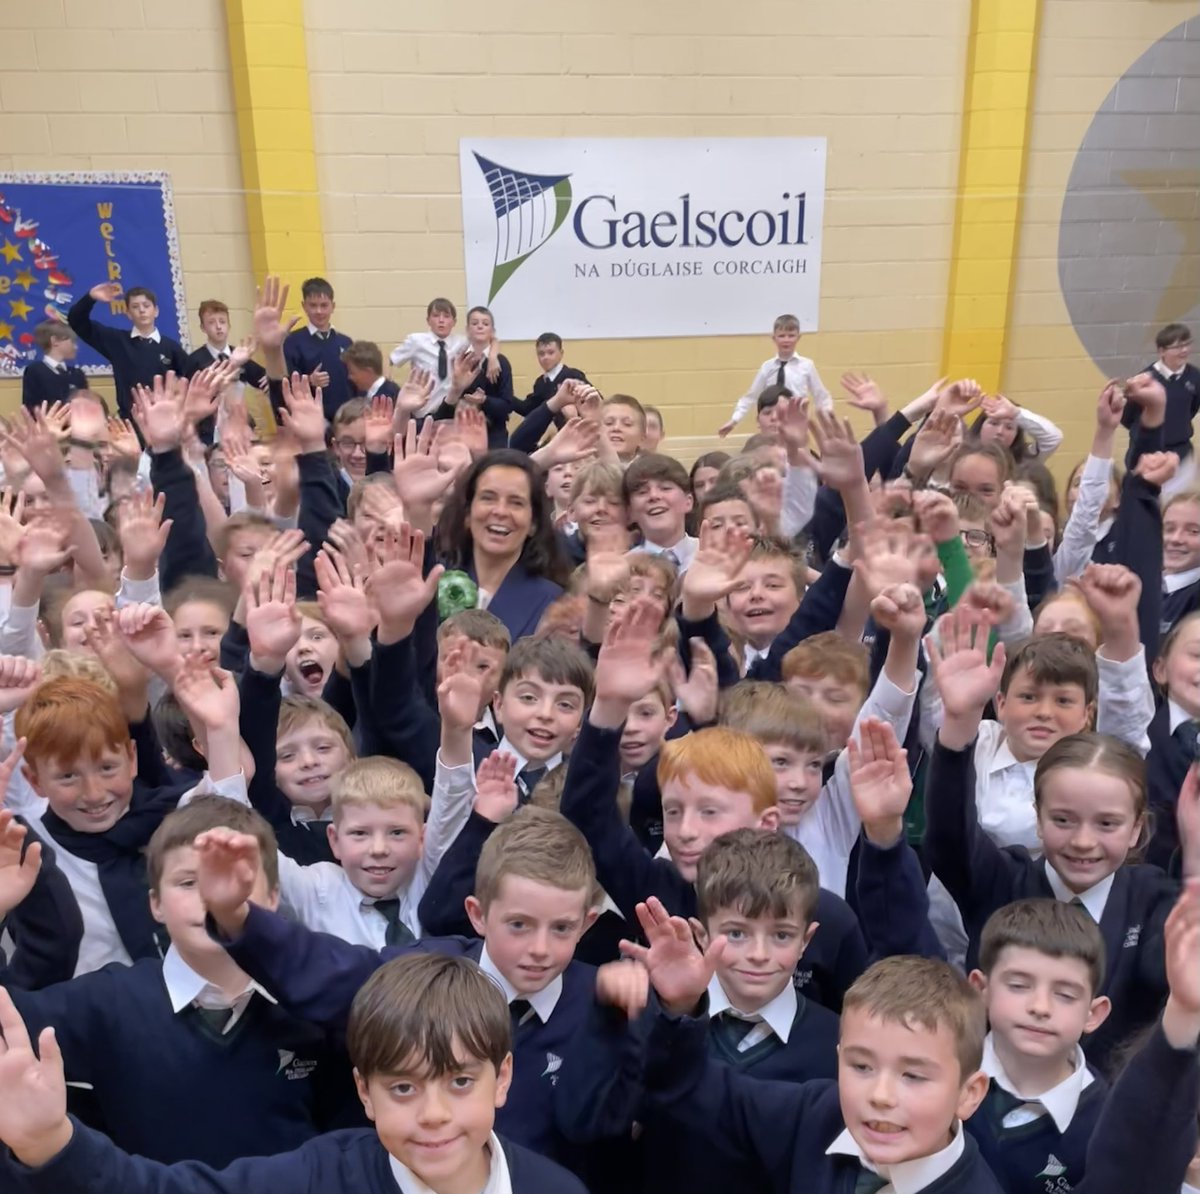 Delighted to be back in #Cork to celebrate #Europeday with @mmcgrathtd & pupils of @gaelscoilnadug1 & @christkingss.

🙏 for the fantastic musical & multilingual welcome! 

Ní neart go cur le chéile: no strenght without unity & diversity. That’s what #Europe is al about! 

🇧🇪🇪🇺🇮🇪